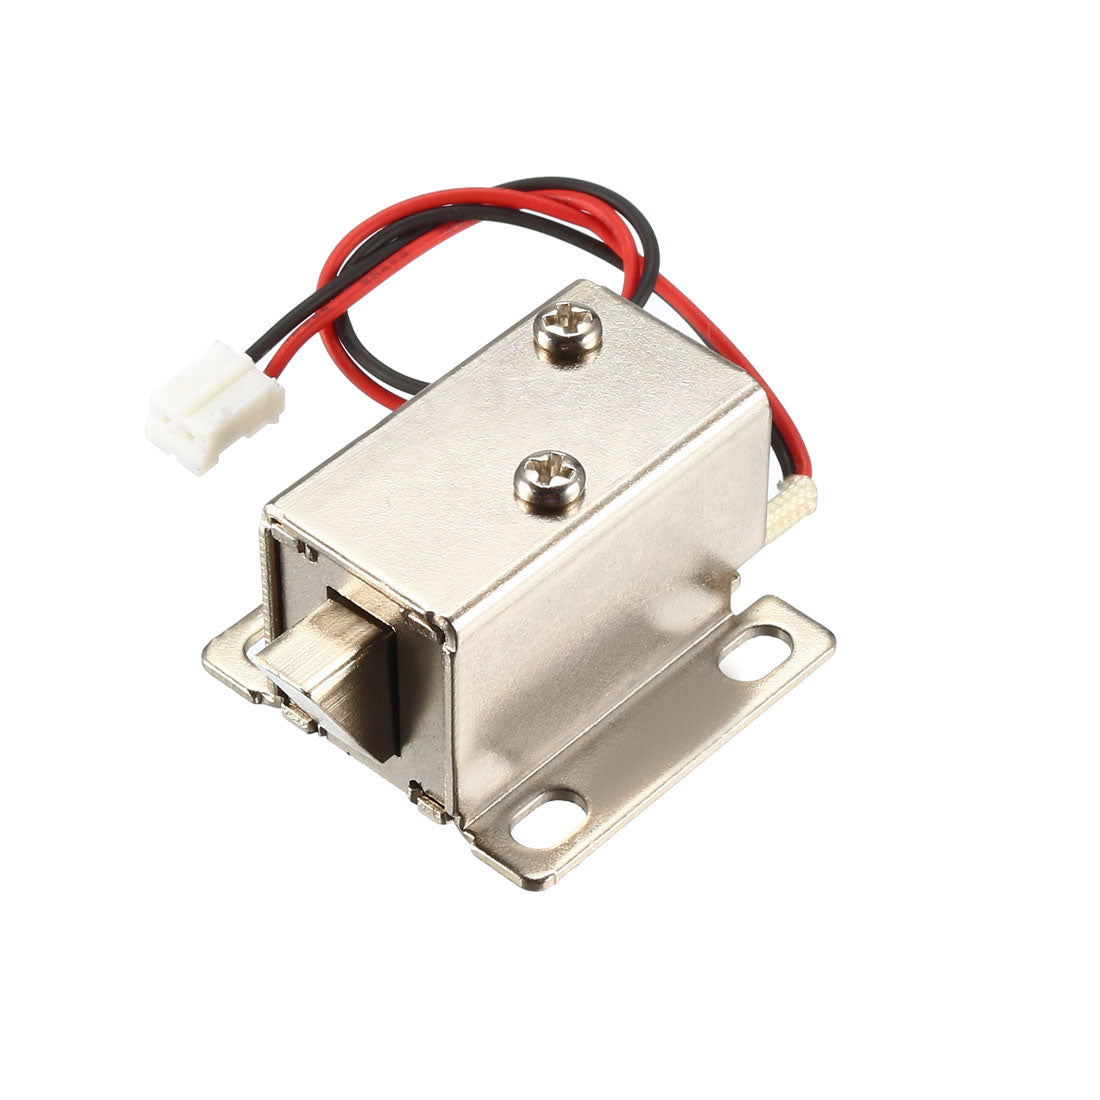 uxcell Uxcell DC 6V 1A 6mm Mini Electromagnetic Solenoid Lock Assembly Tongue Down for Electirc Lock Cabinet Door Lock